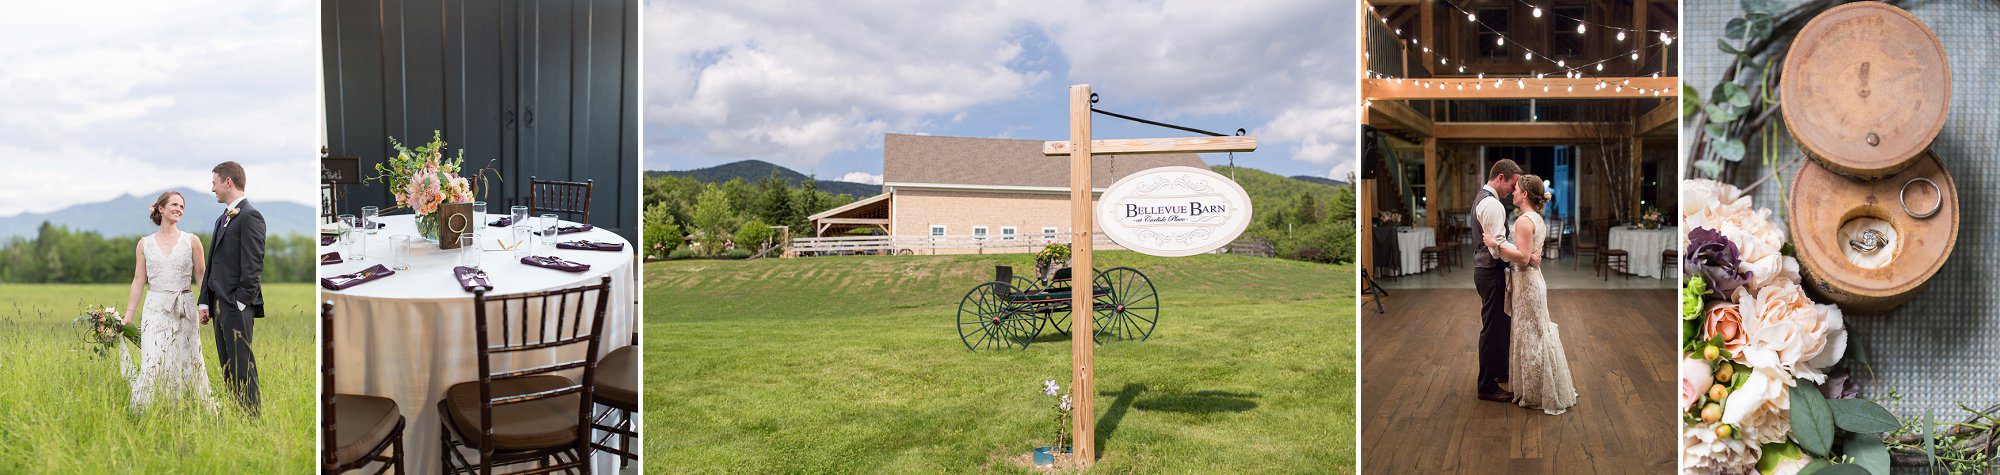 5 Star Review for Erika Follansbee Photography at Bellvue Barn at Carlisle Place, Jefferson NH